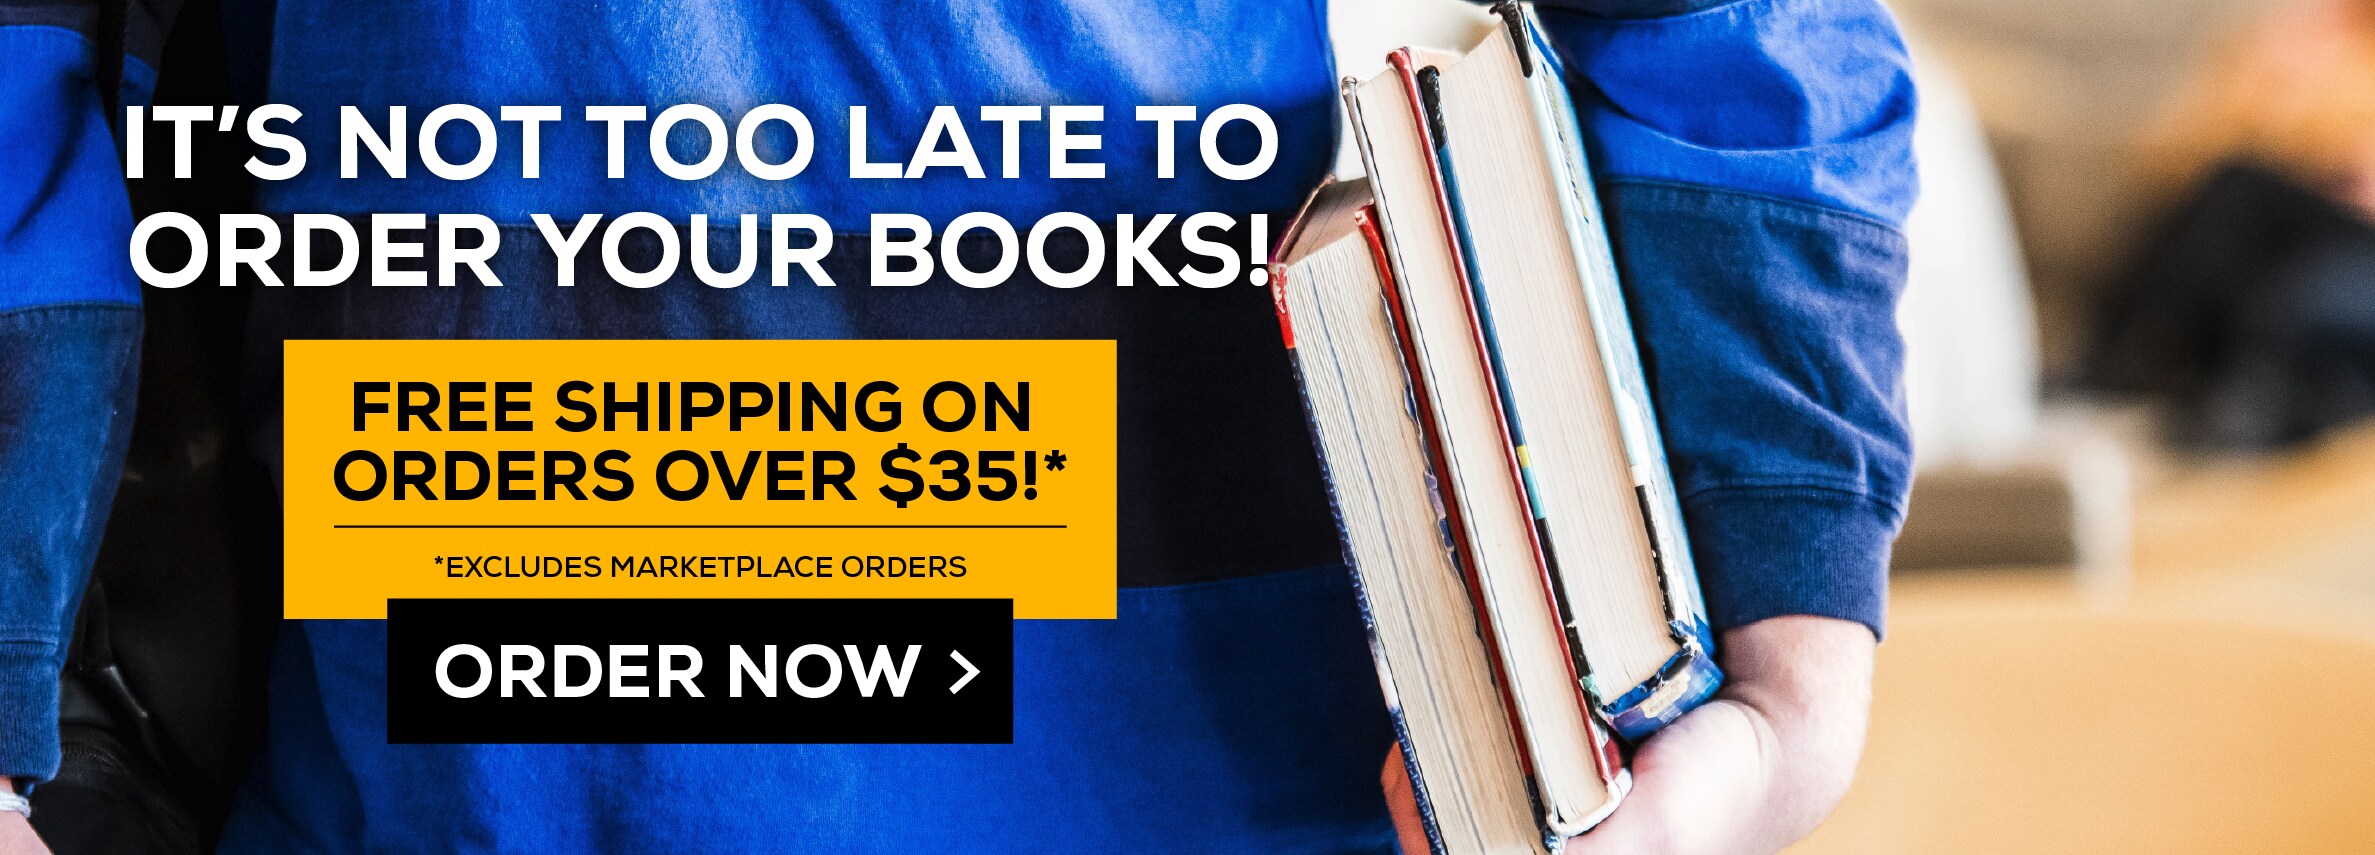 ItÃ¢â‚¬â„¢s not too late to order your books! Free shipping on all orders over $35!* Excludes marketplace purchases. Order Now.